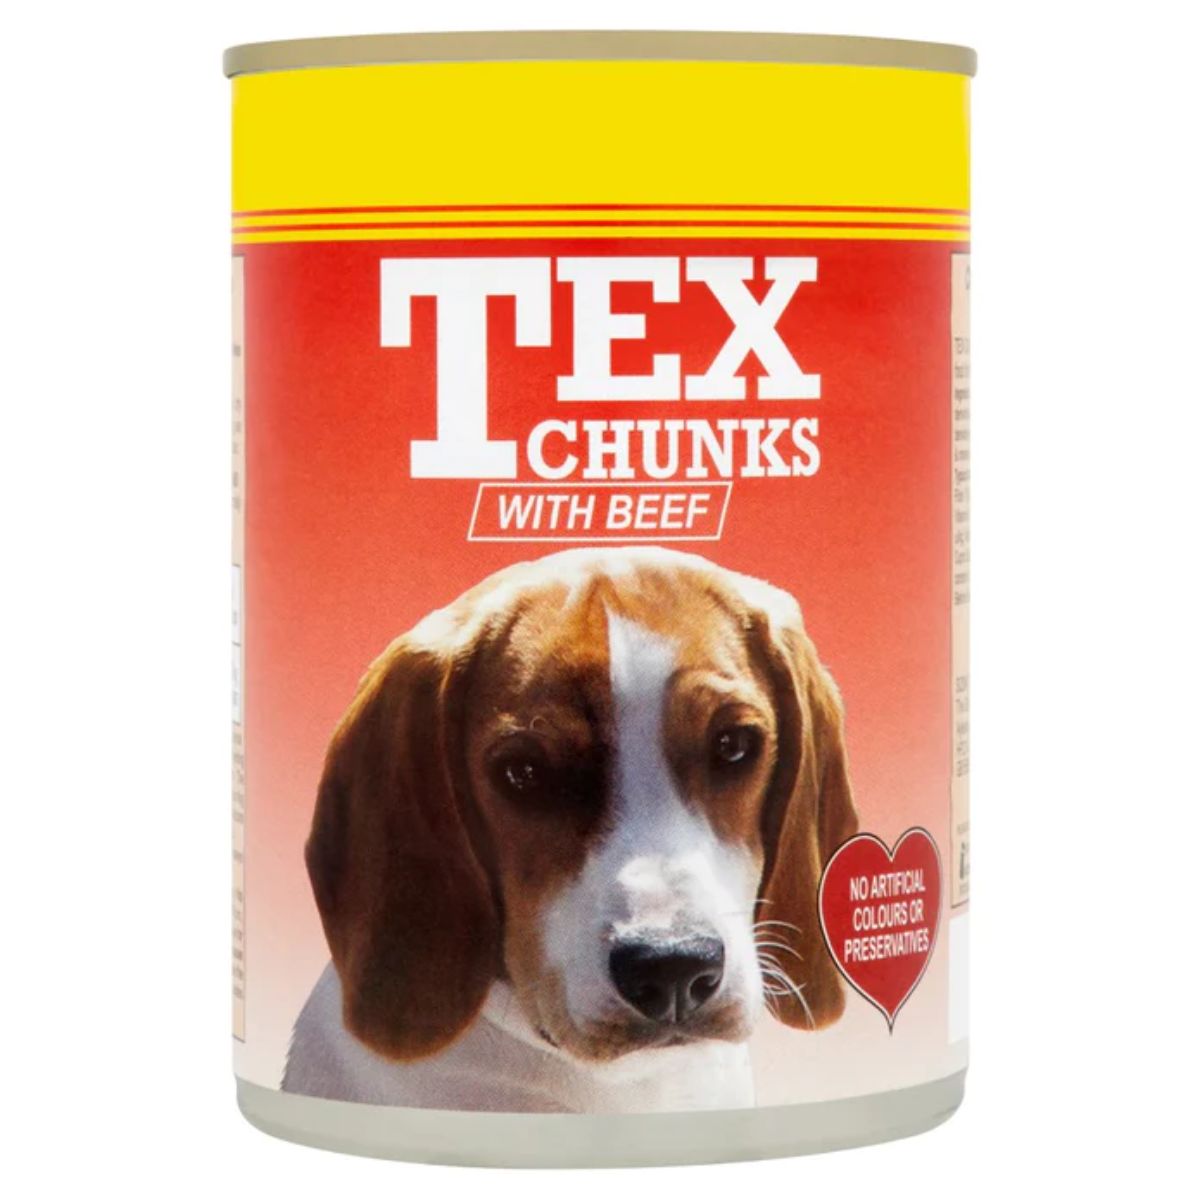 A can of Tex - Chunks with Beef - 400g on a white background.